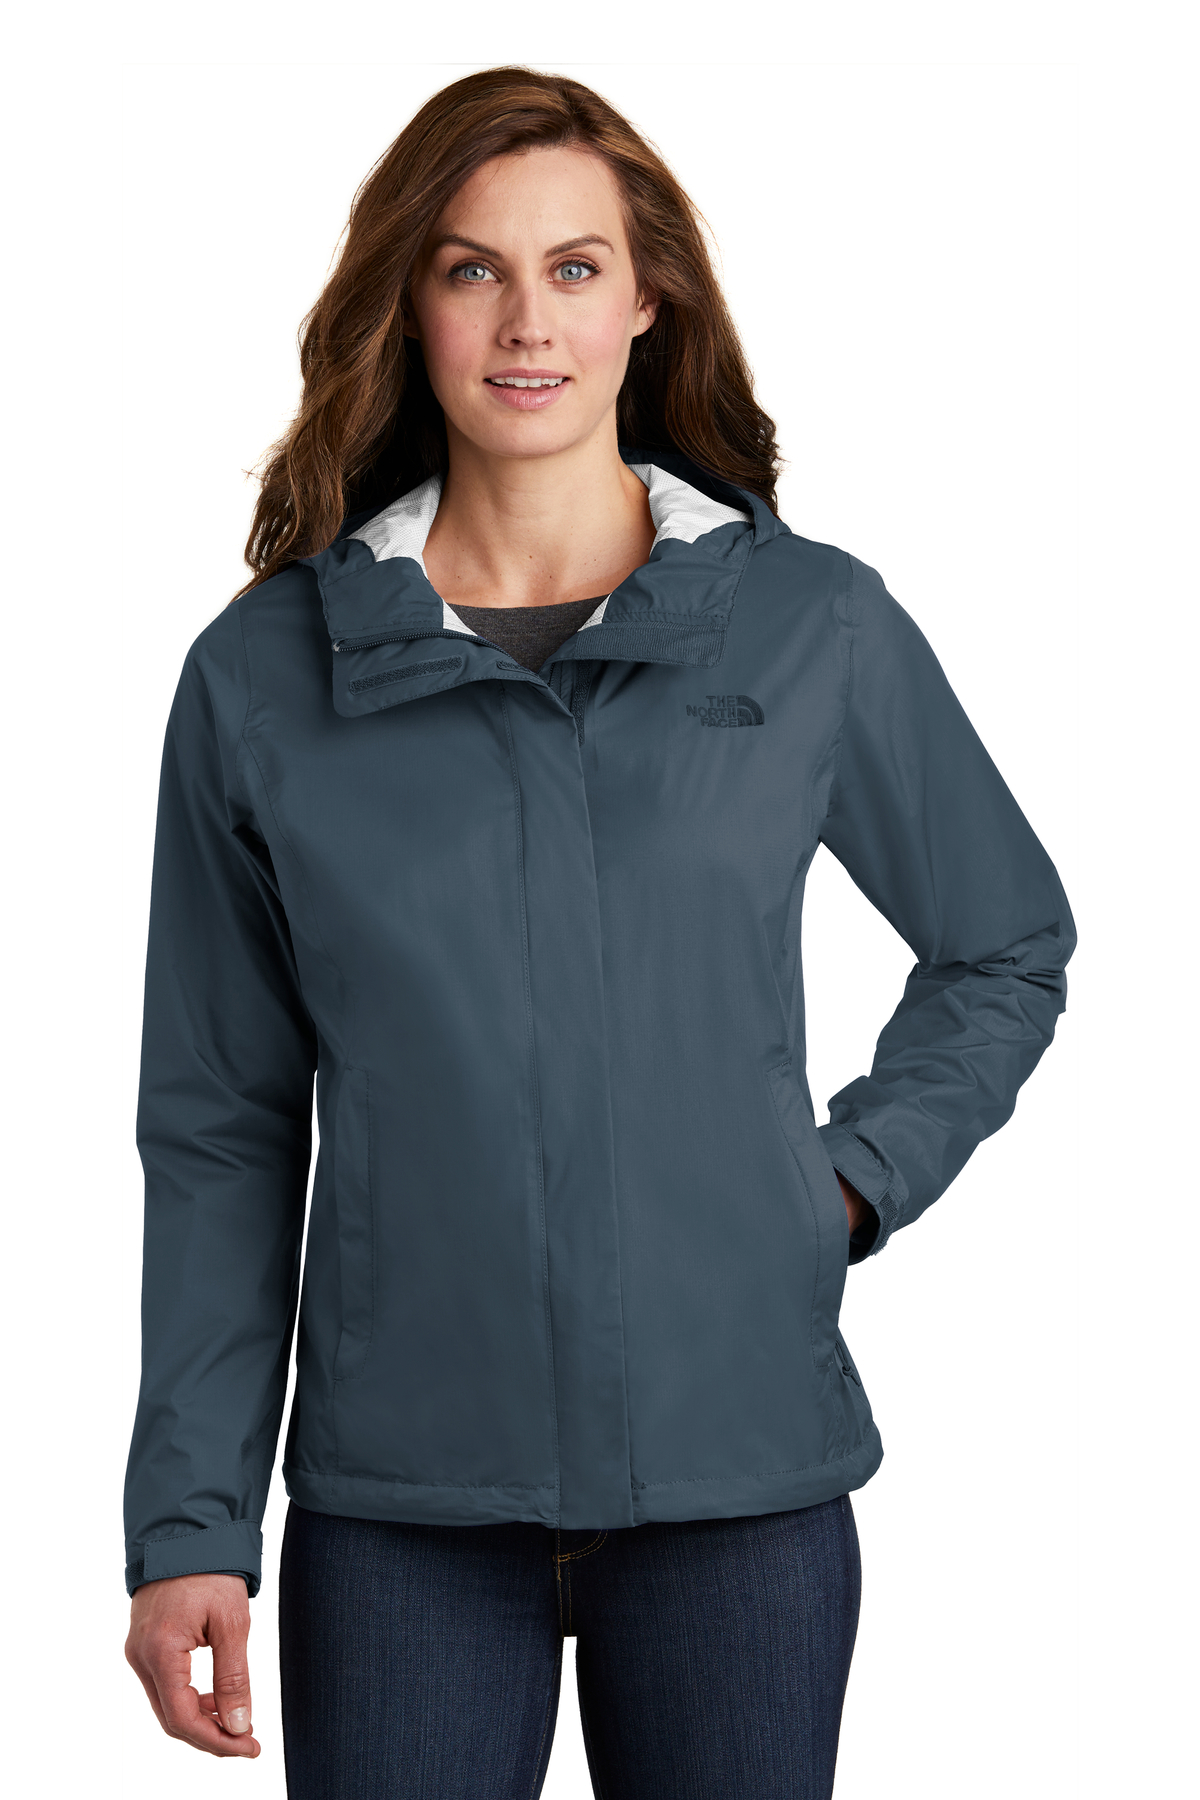 The North Face Women's DryVent Rain Jacket | Outerwear - Queensboro